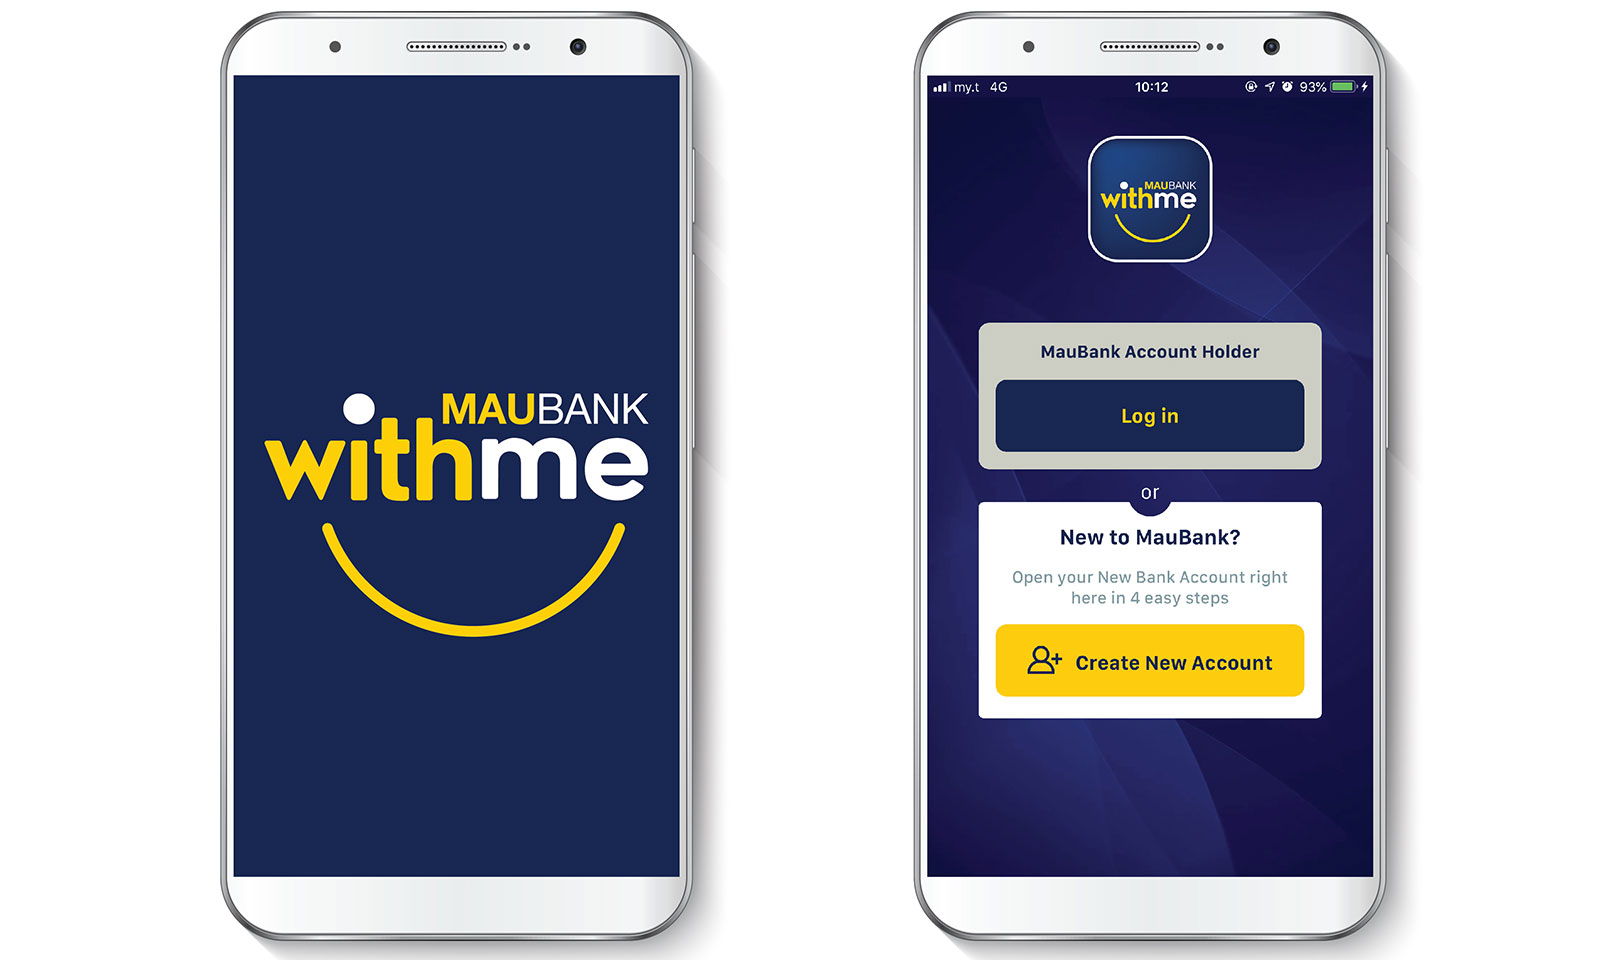 WithMe, the new MauBank mobile application